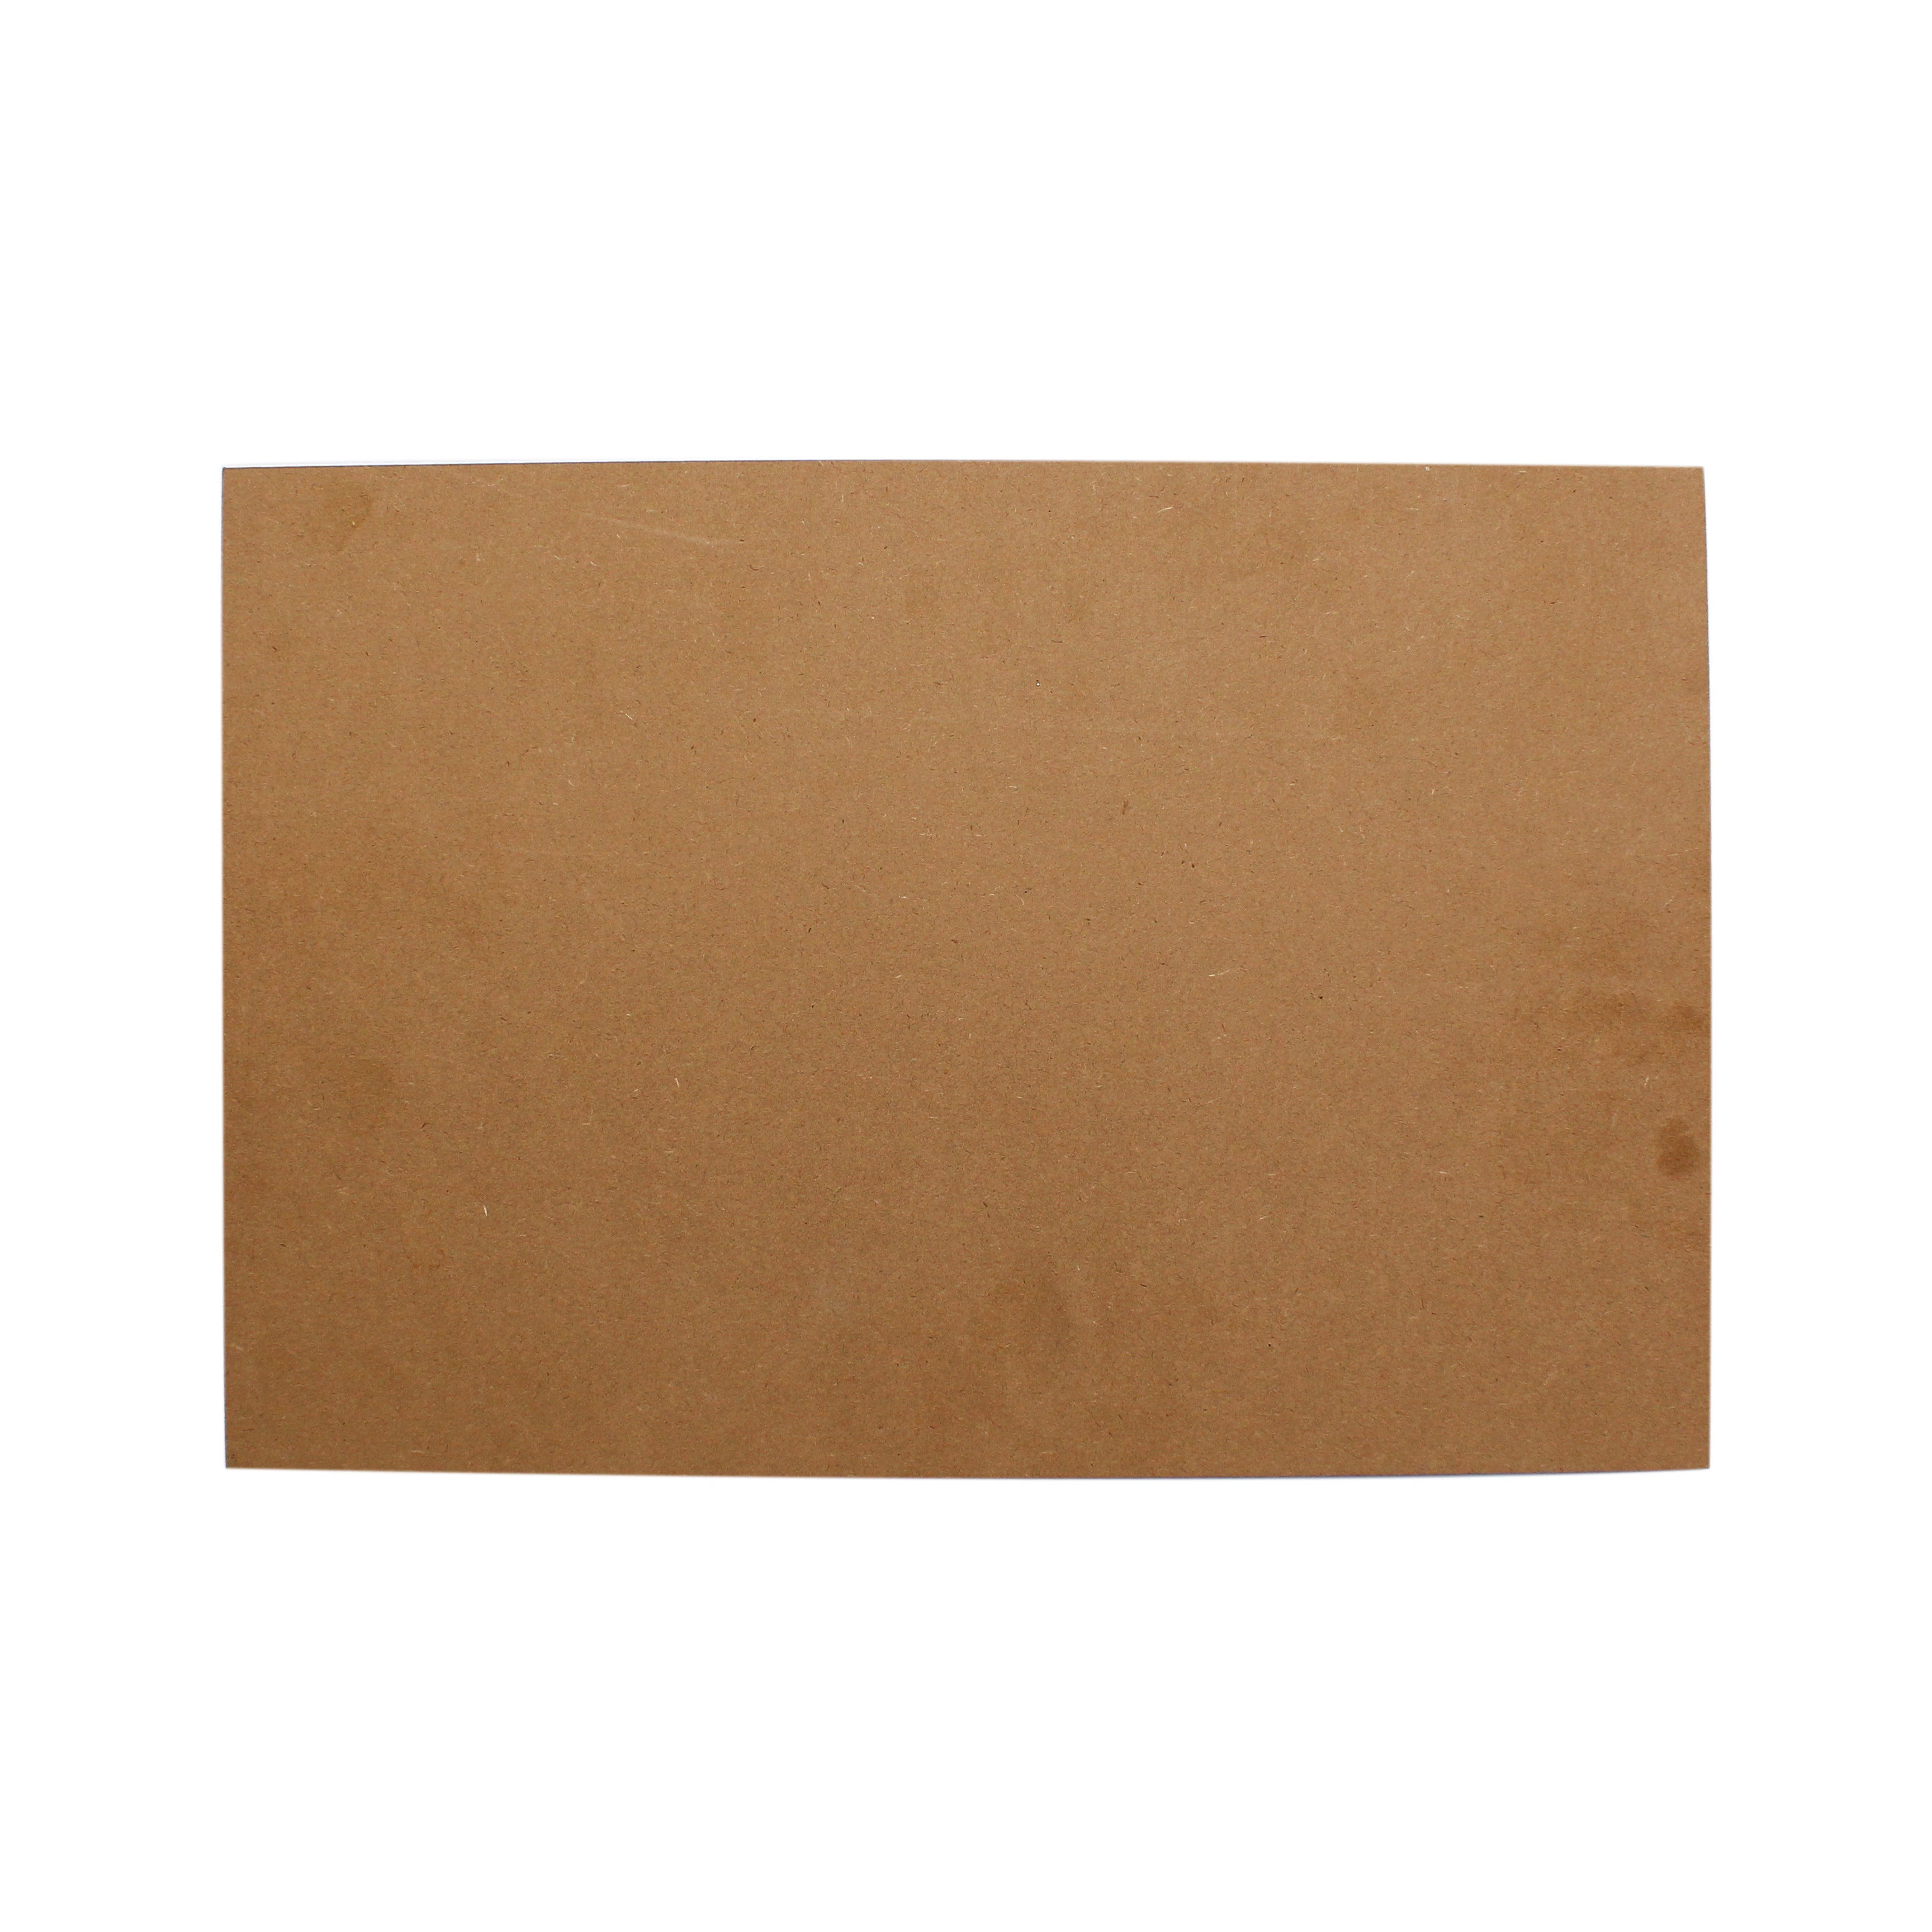 Mdf Blank Rectangle 12 X 18Inch 5Mm Thick 1Pc Lb